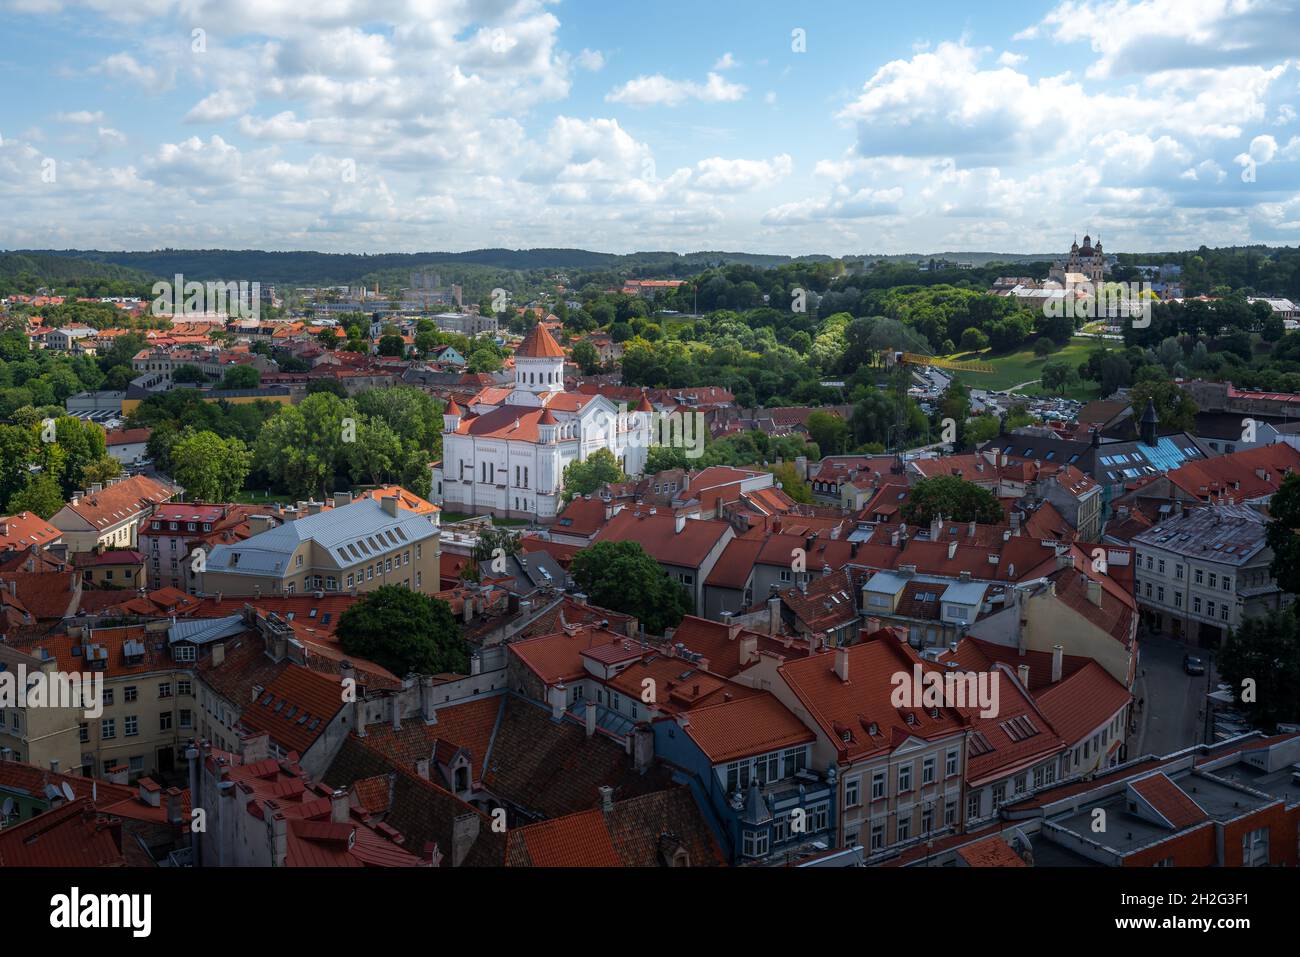 Aerial view of Vilnius with Orthodox Cathedral of the Theotokos - Vilnius, Lithuania Stock Photo